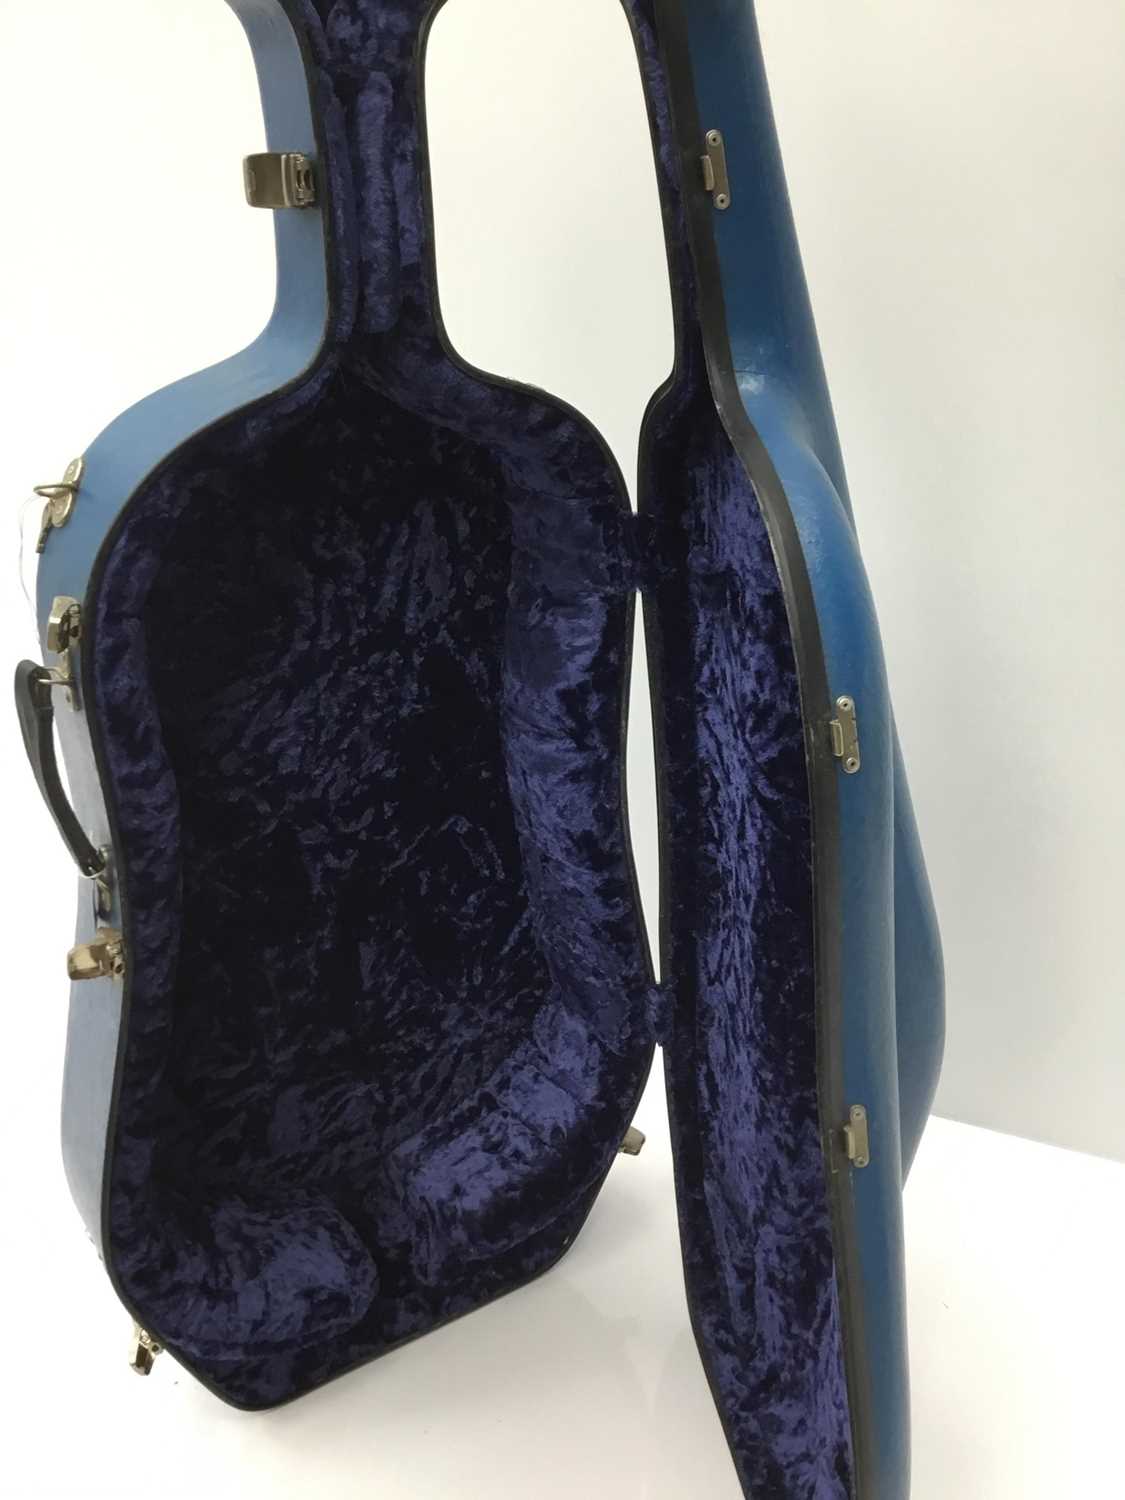 Cello case by Paxman Ltd, with blue finish, internal measurement approximately 132cm - Image 3 of 4